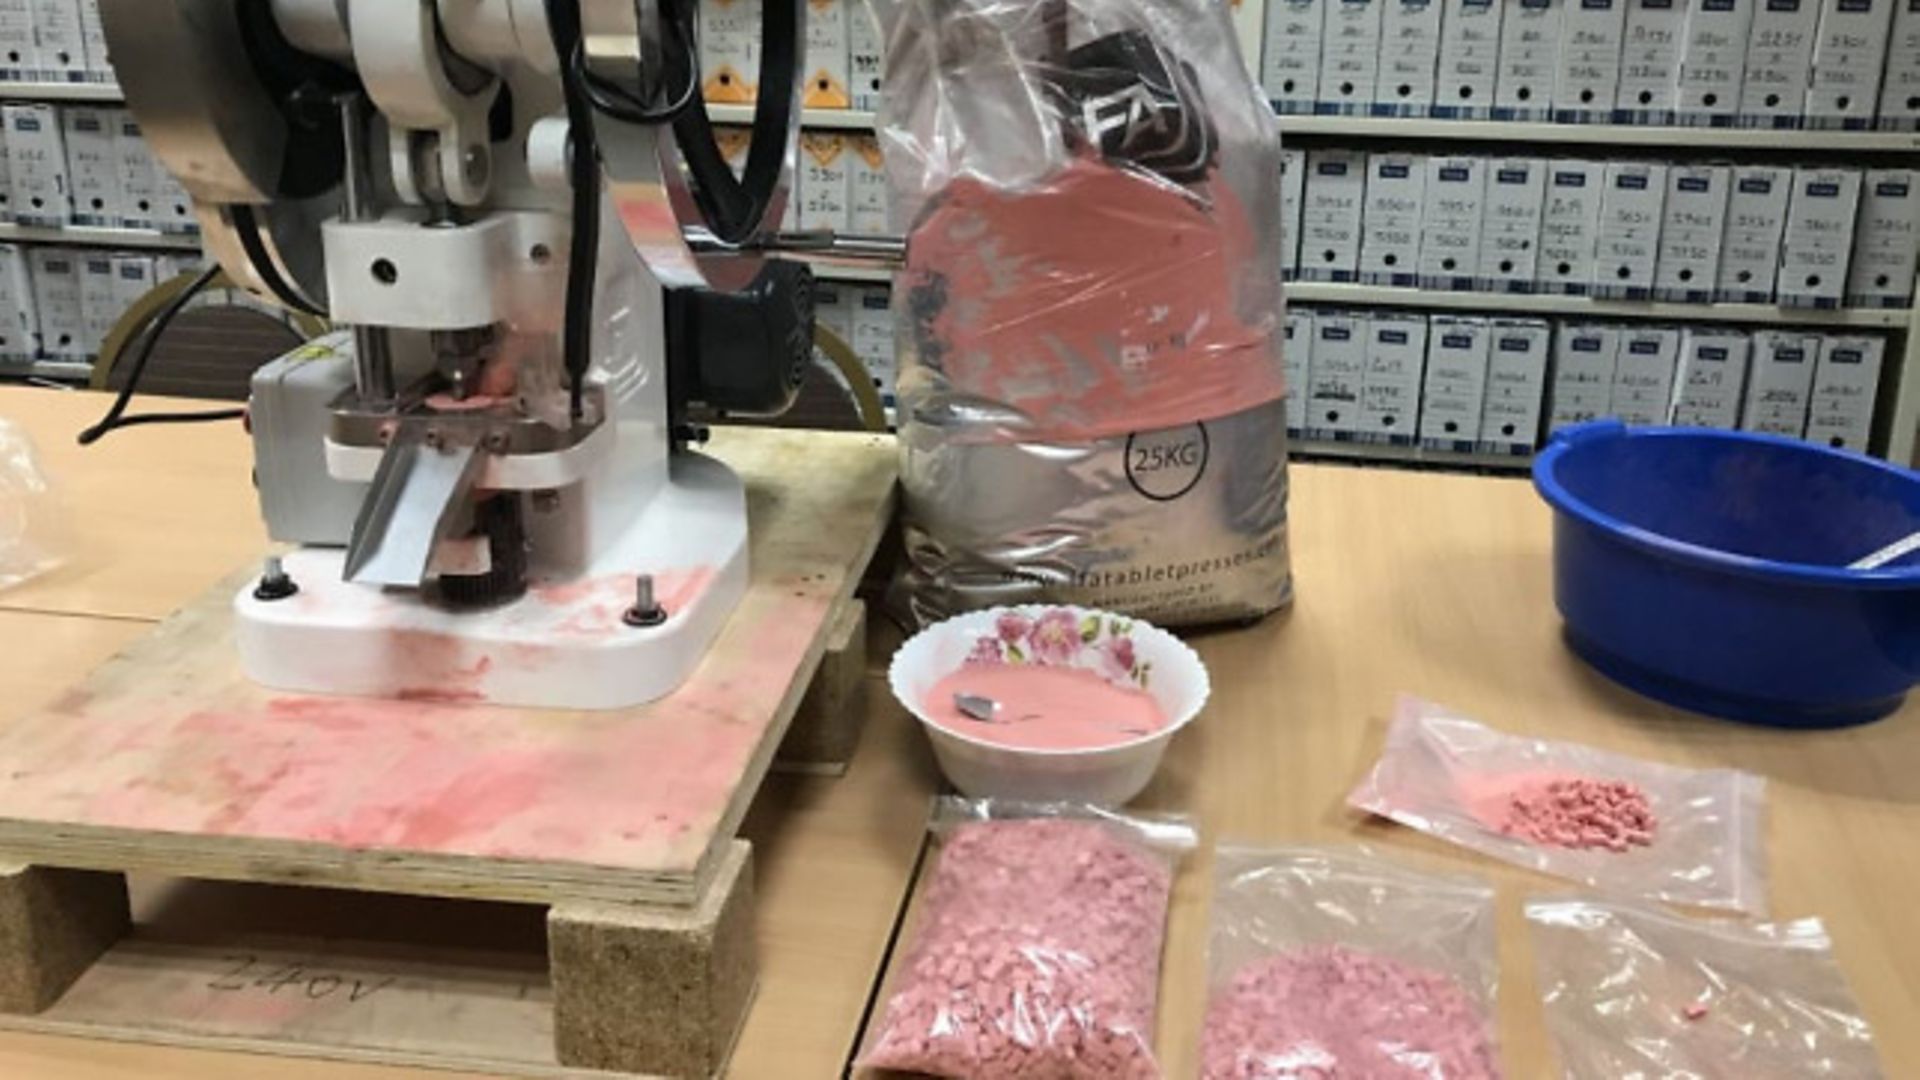 A large quantity of suspected MDMA and ecstasy, seized by police in Paris, that turned out to be Haribo strawberry sweets - Credit: Twitter/@prefpolice